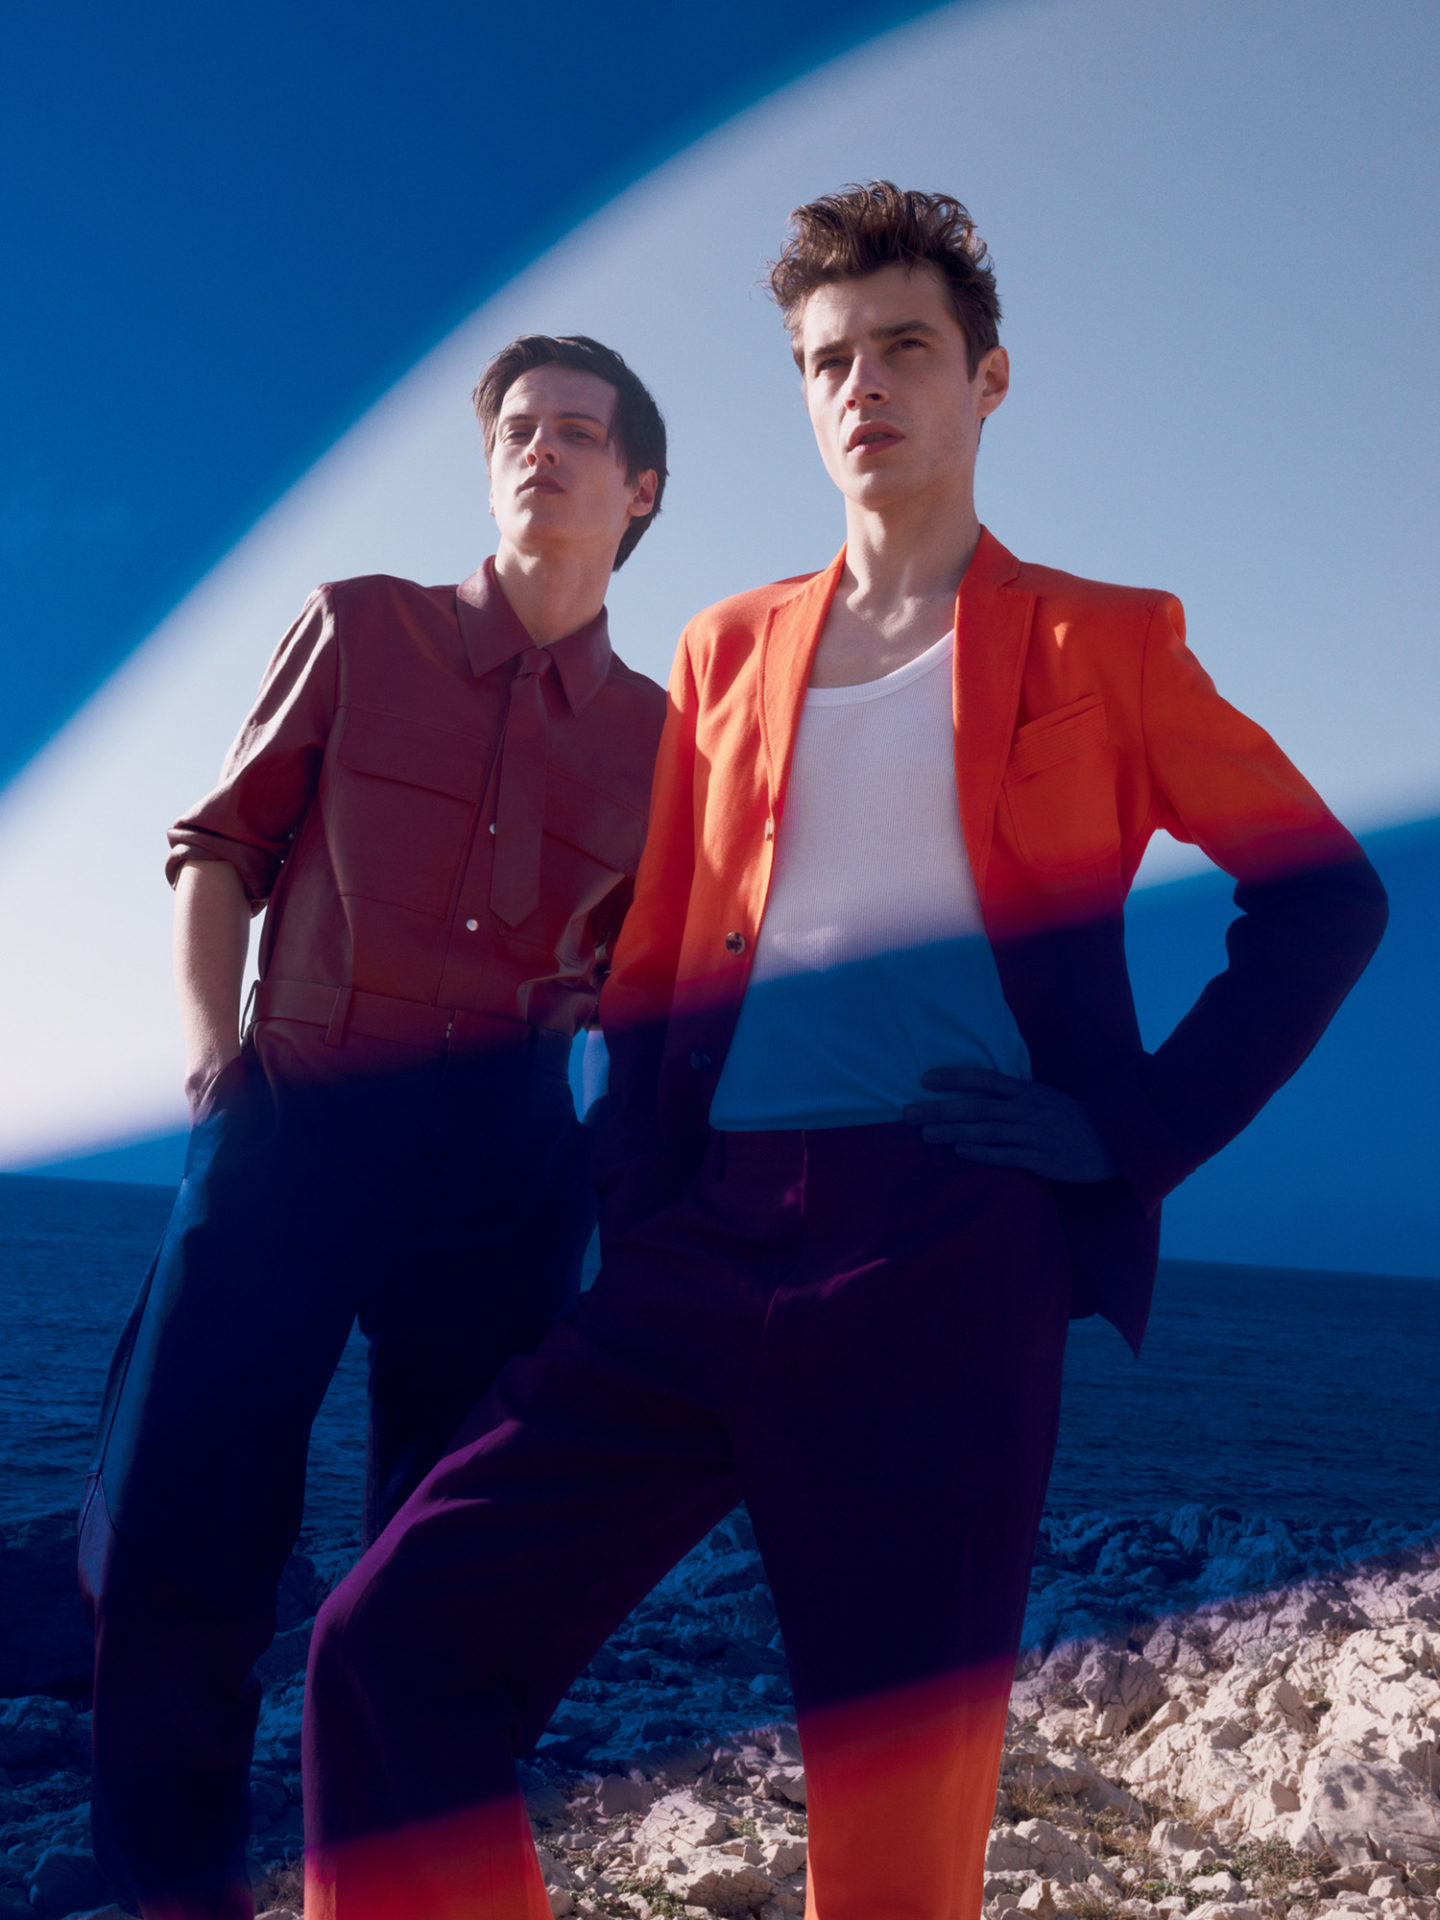 Joseph Signoret and Adrien Sahores by Éric Nehr for Madame Figaro March 18th, 2022